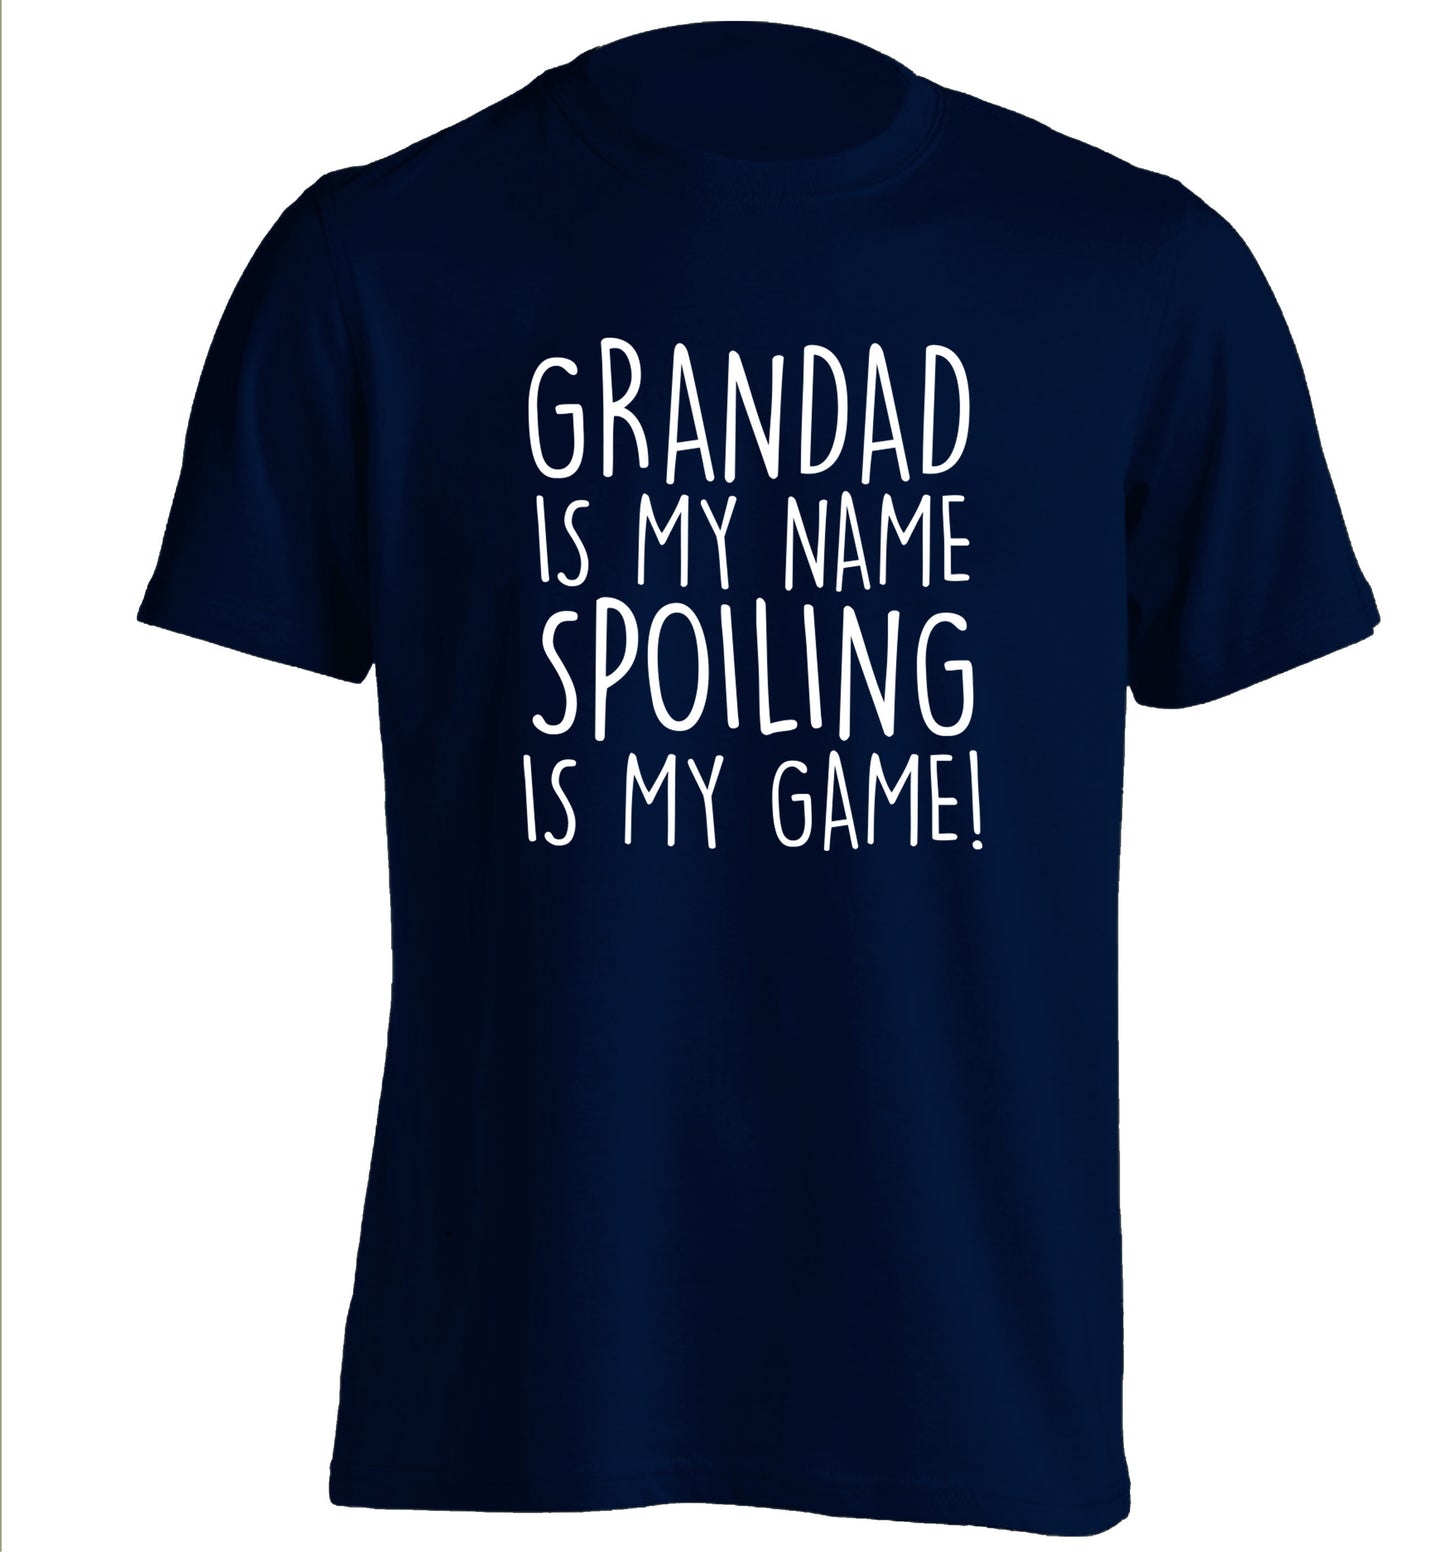 Grandad is my name, spoiling is my game adults unisex navy Tshirt 2XL